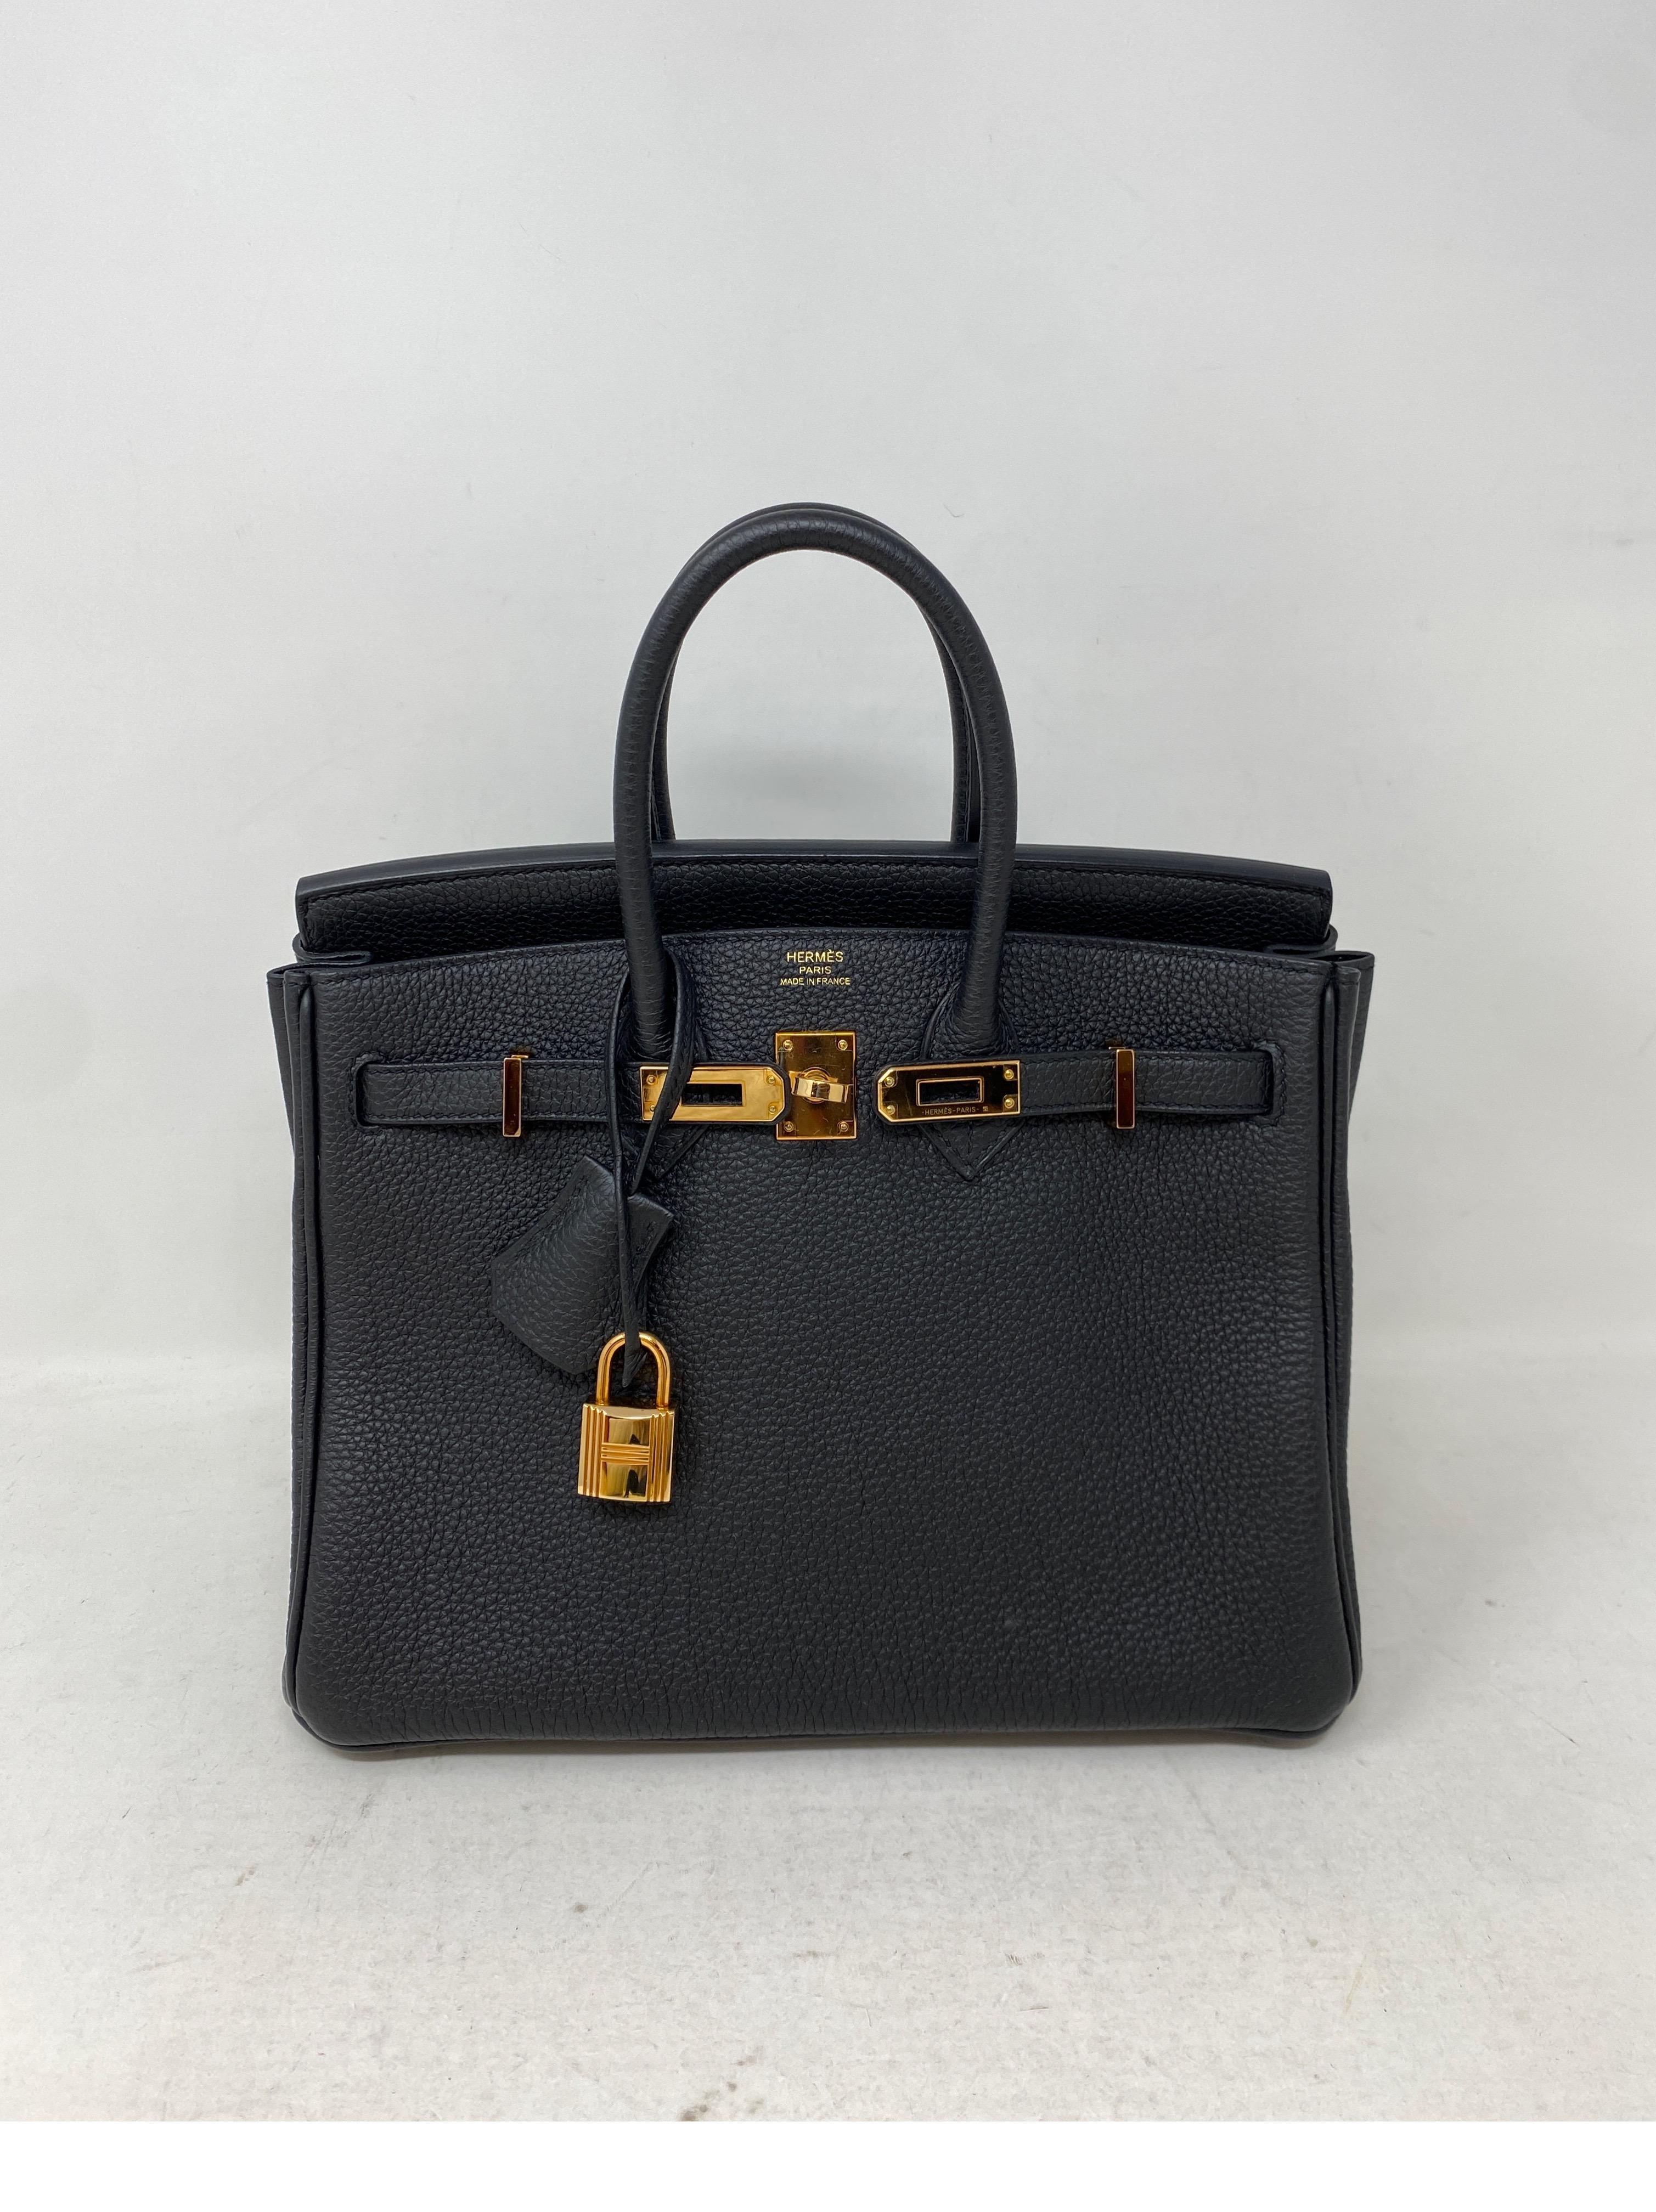 Hermes Black Birkin 25 Bag. Rose gold hardware. Rare 24 size and most wanted black. Hard to get rose gold hardware. Togo leather. Brand new. Never used. Full set. Includes clochette. lock, keys, dust bag and box. Would make a great gift. Guaranteed